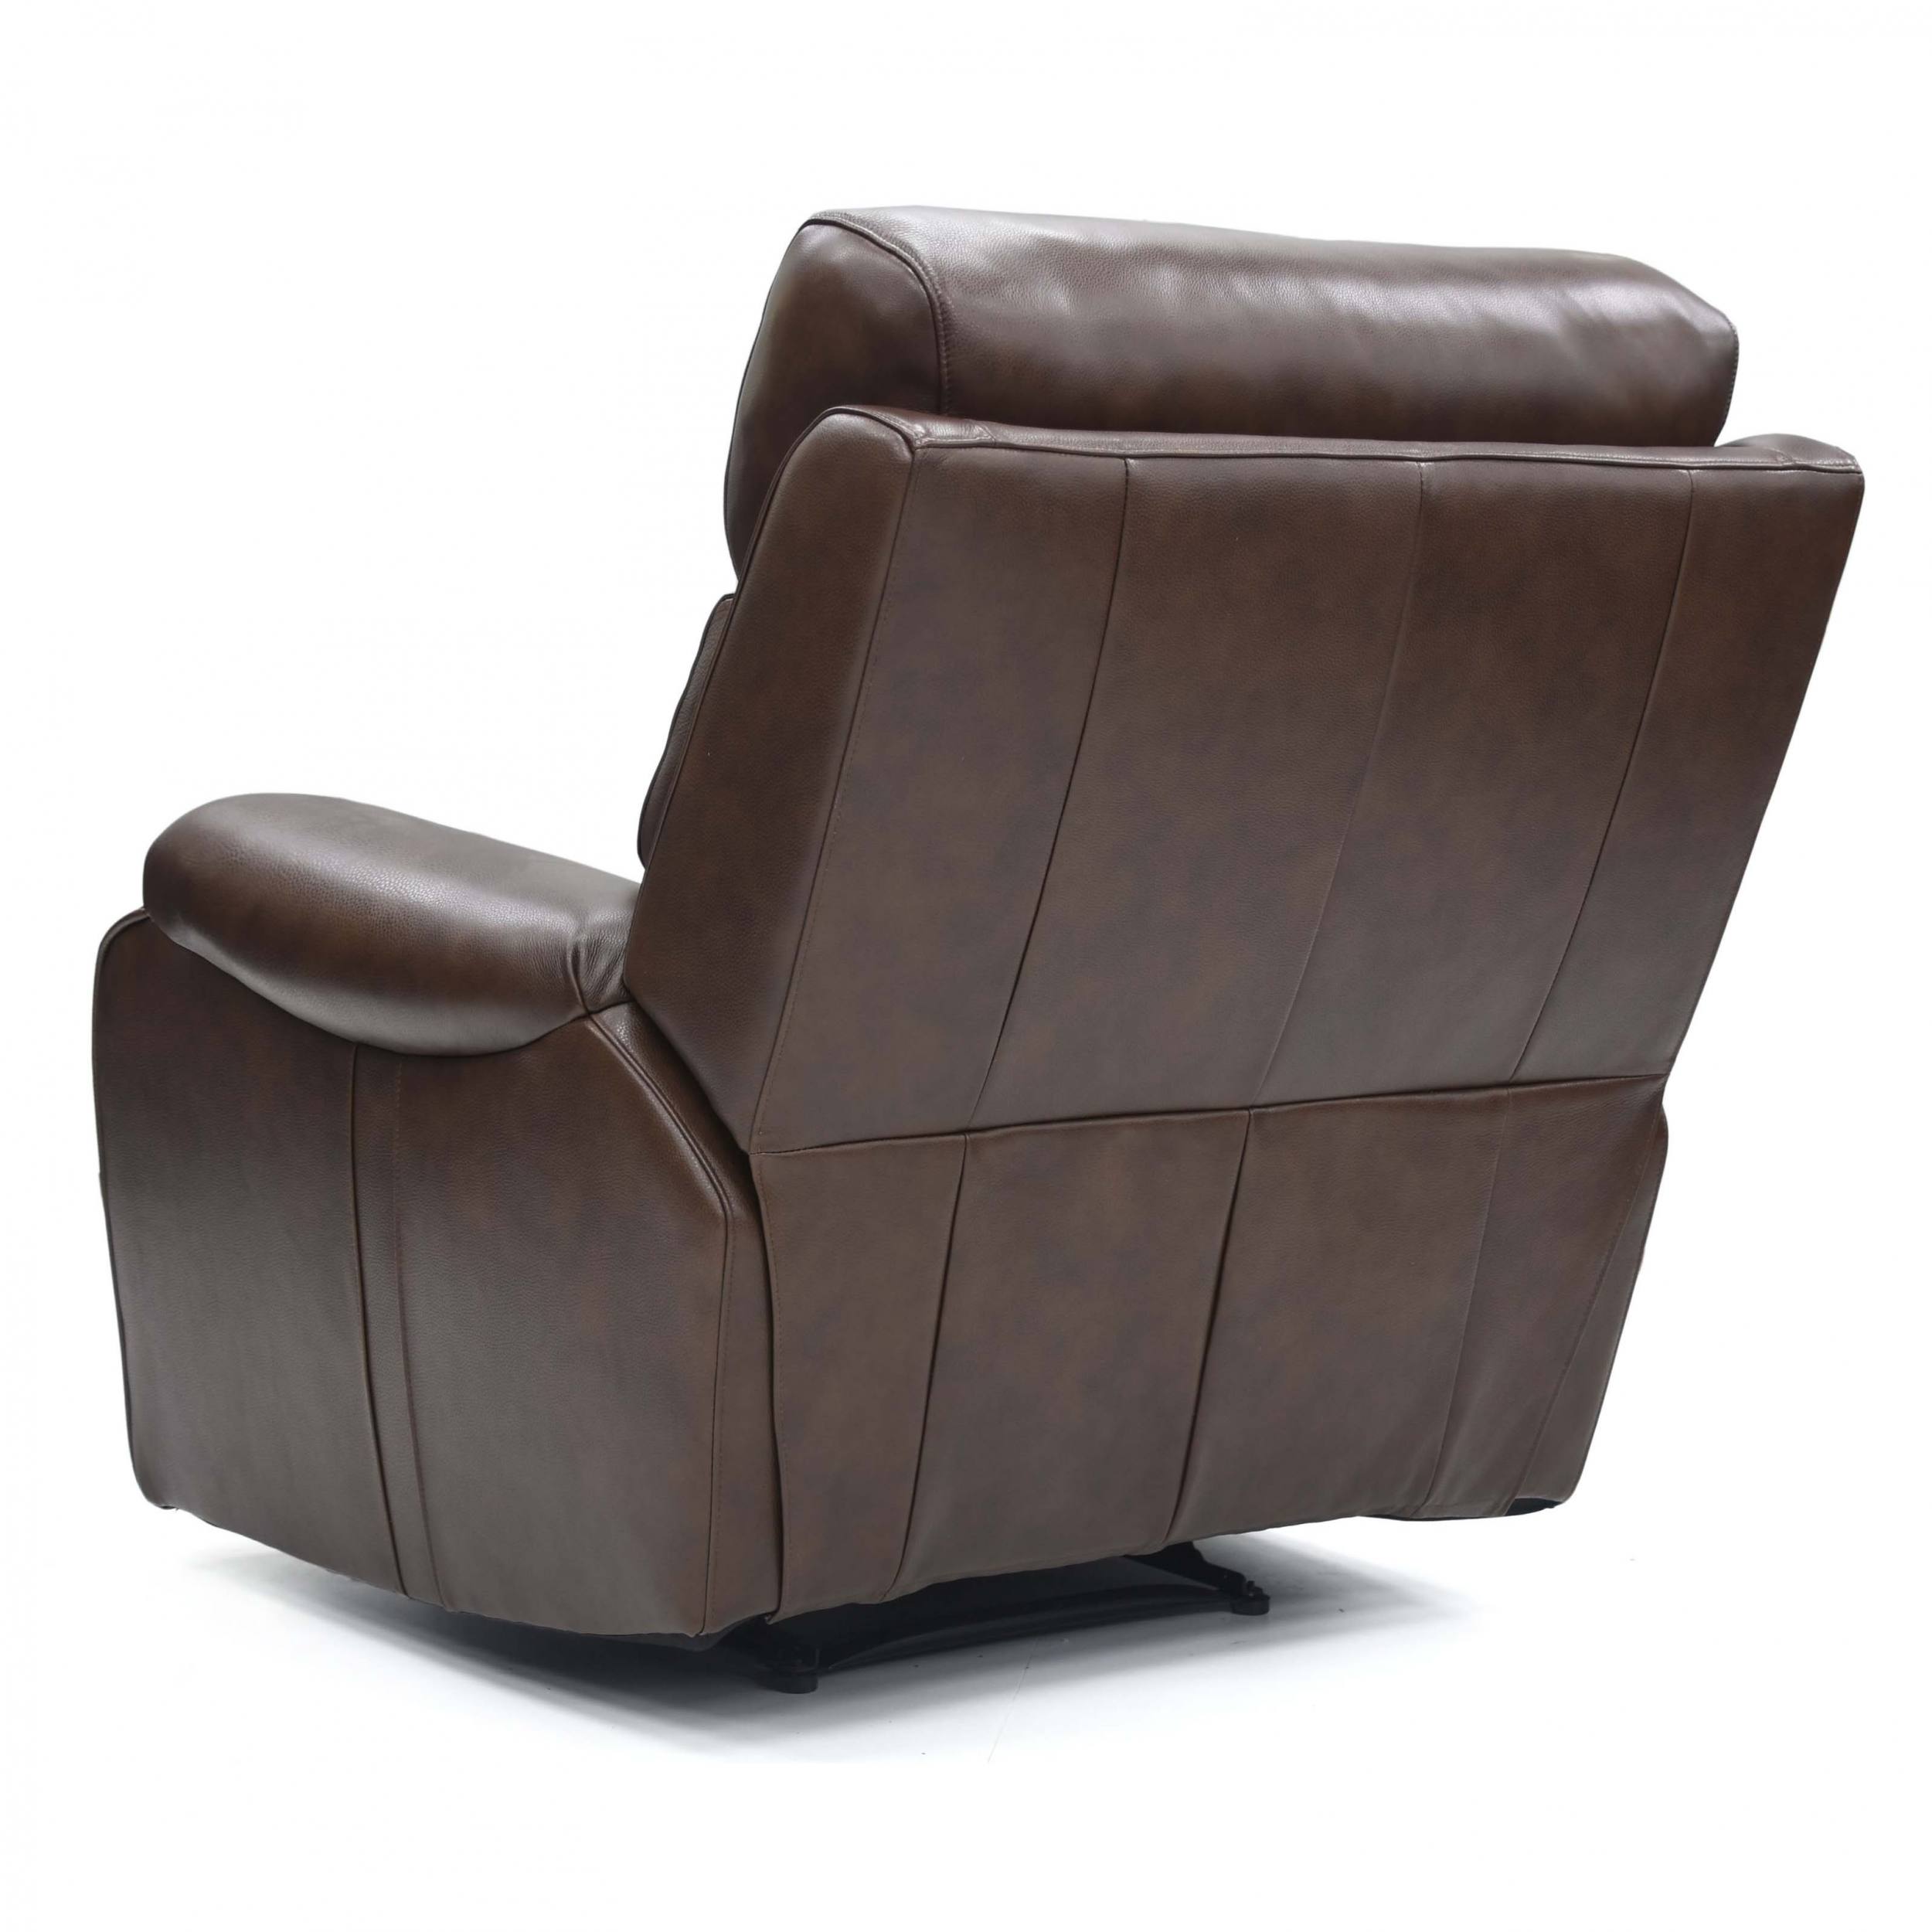 La-Z-Boy Winchester Manual Recliner Chair at Style Furniture